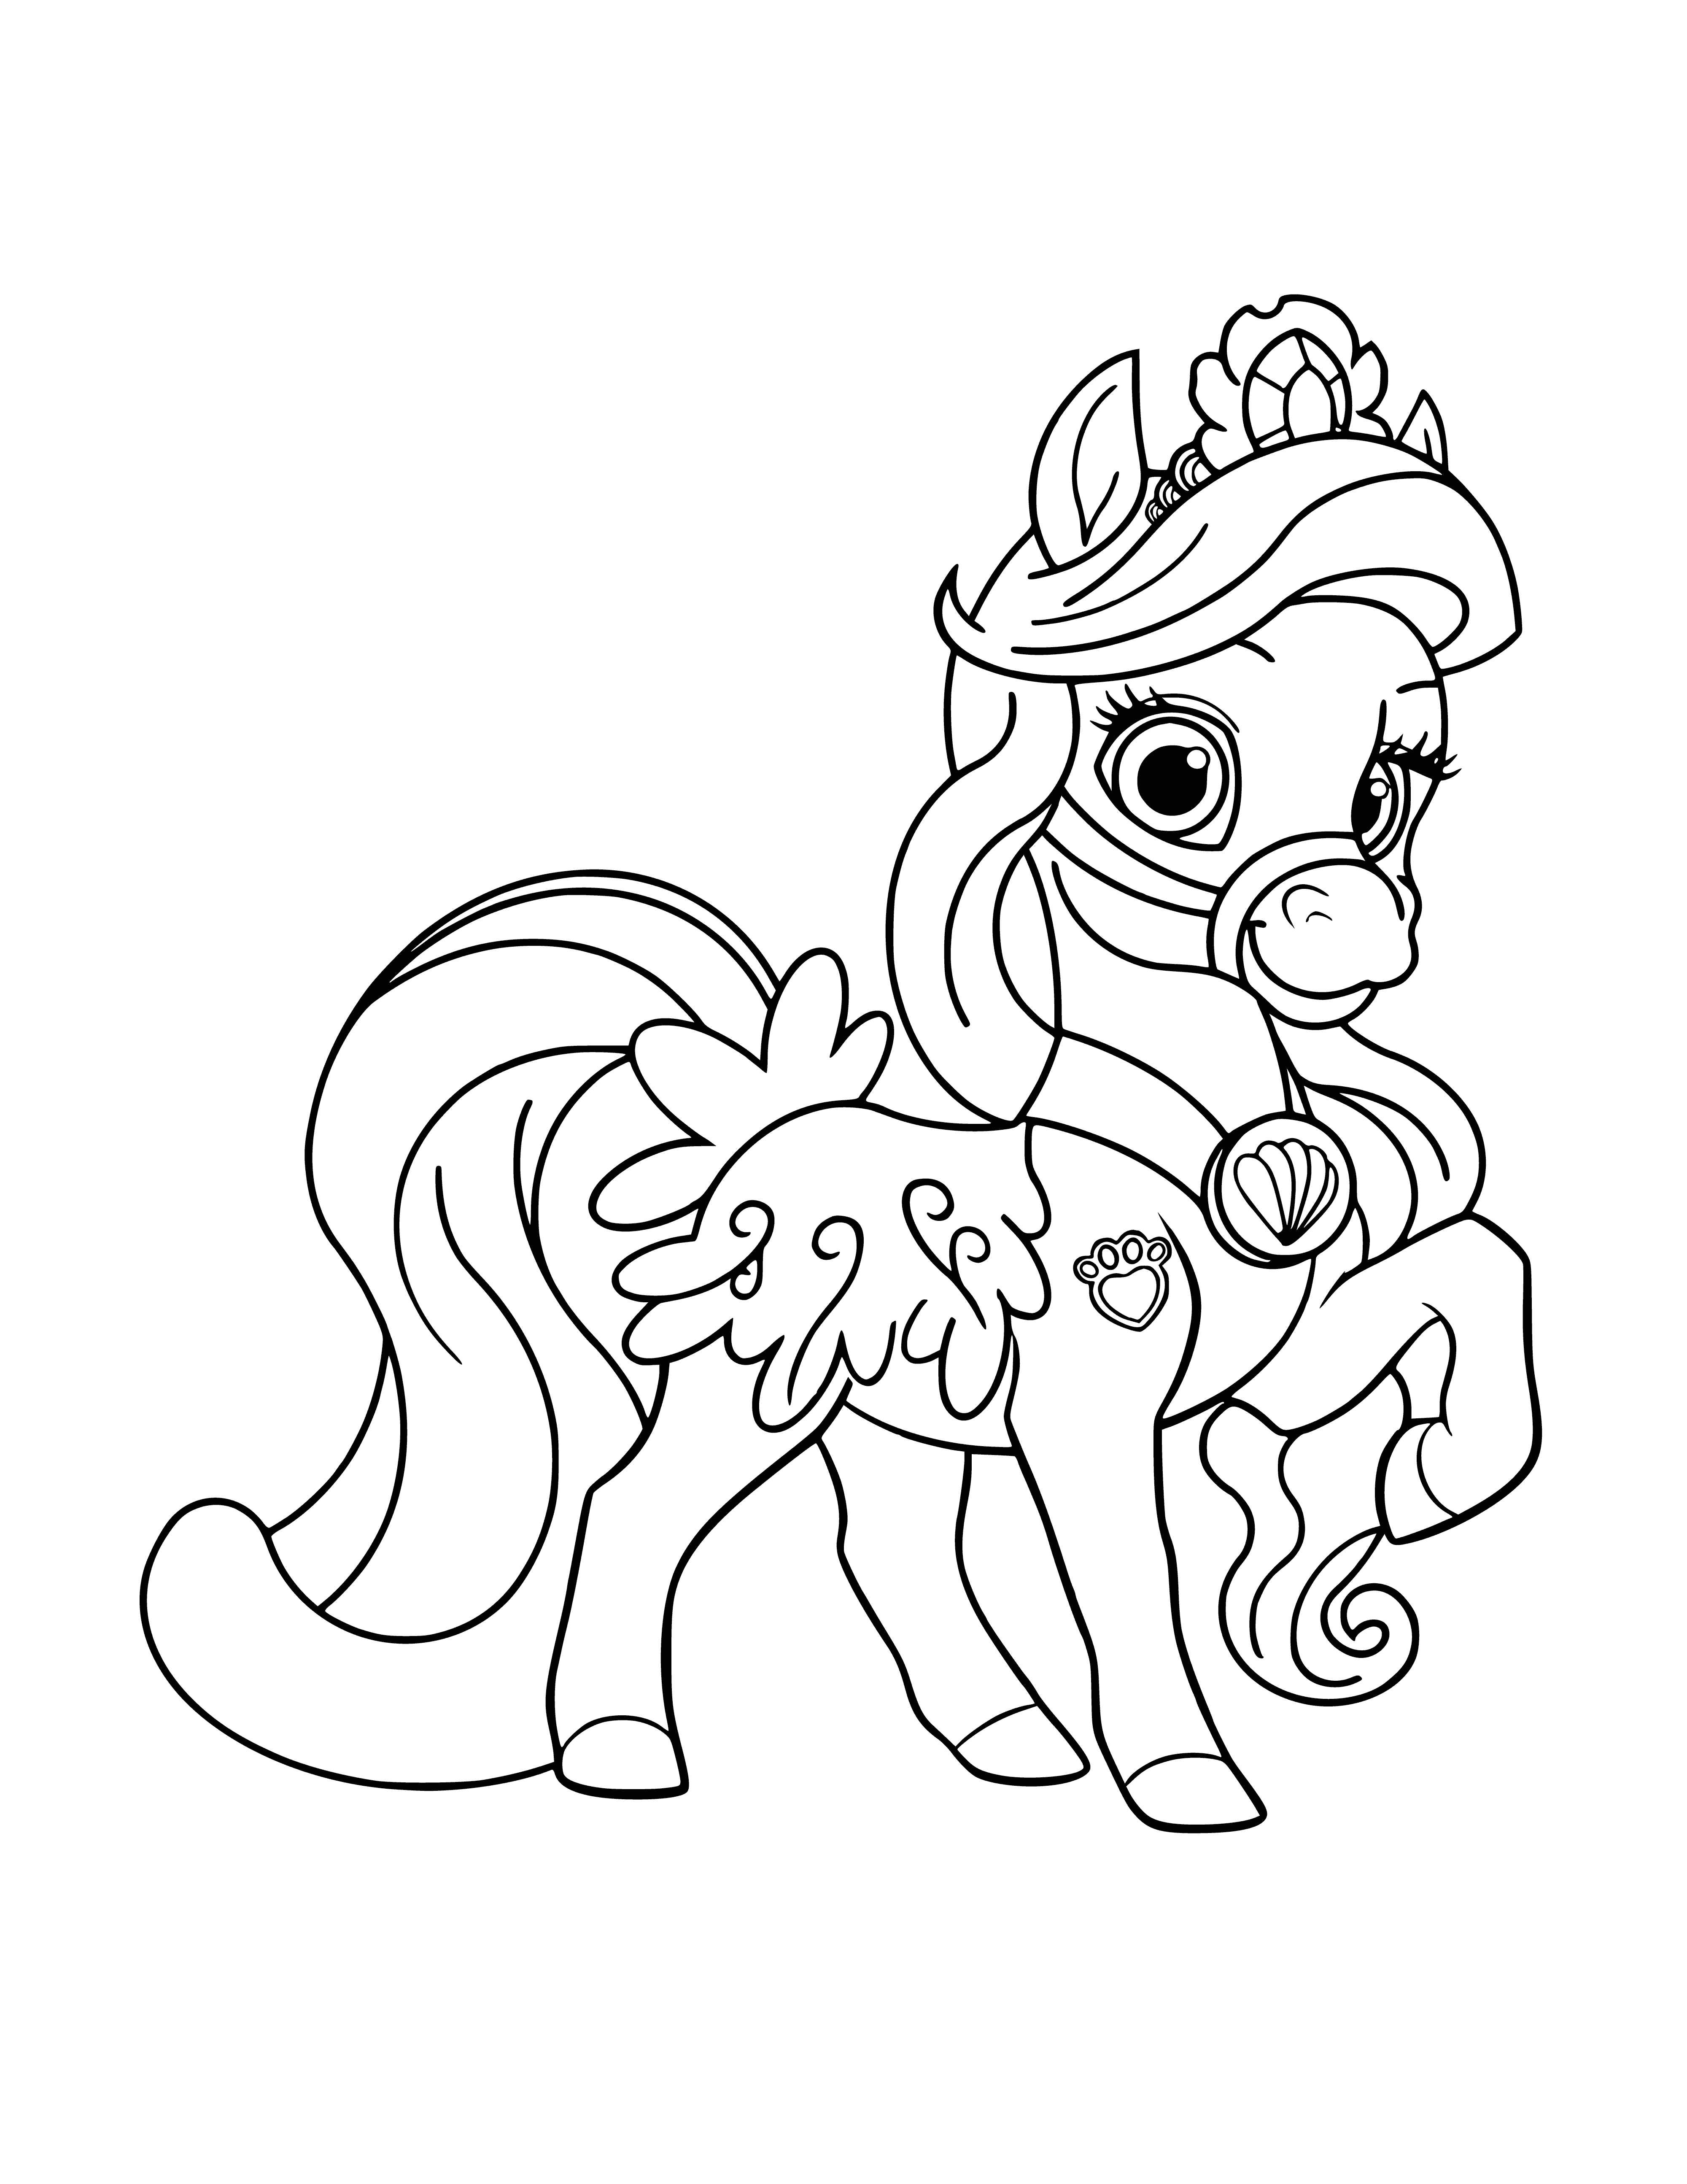 coloring page: Royal family has two pets: a pony called Droplet and an Arial who are very loving and enjoy spending time with them.